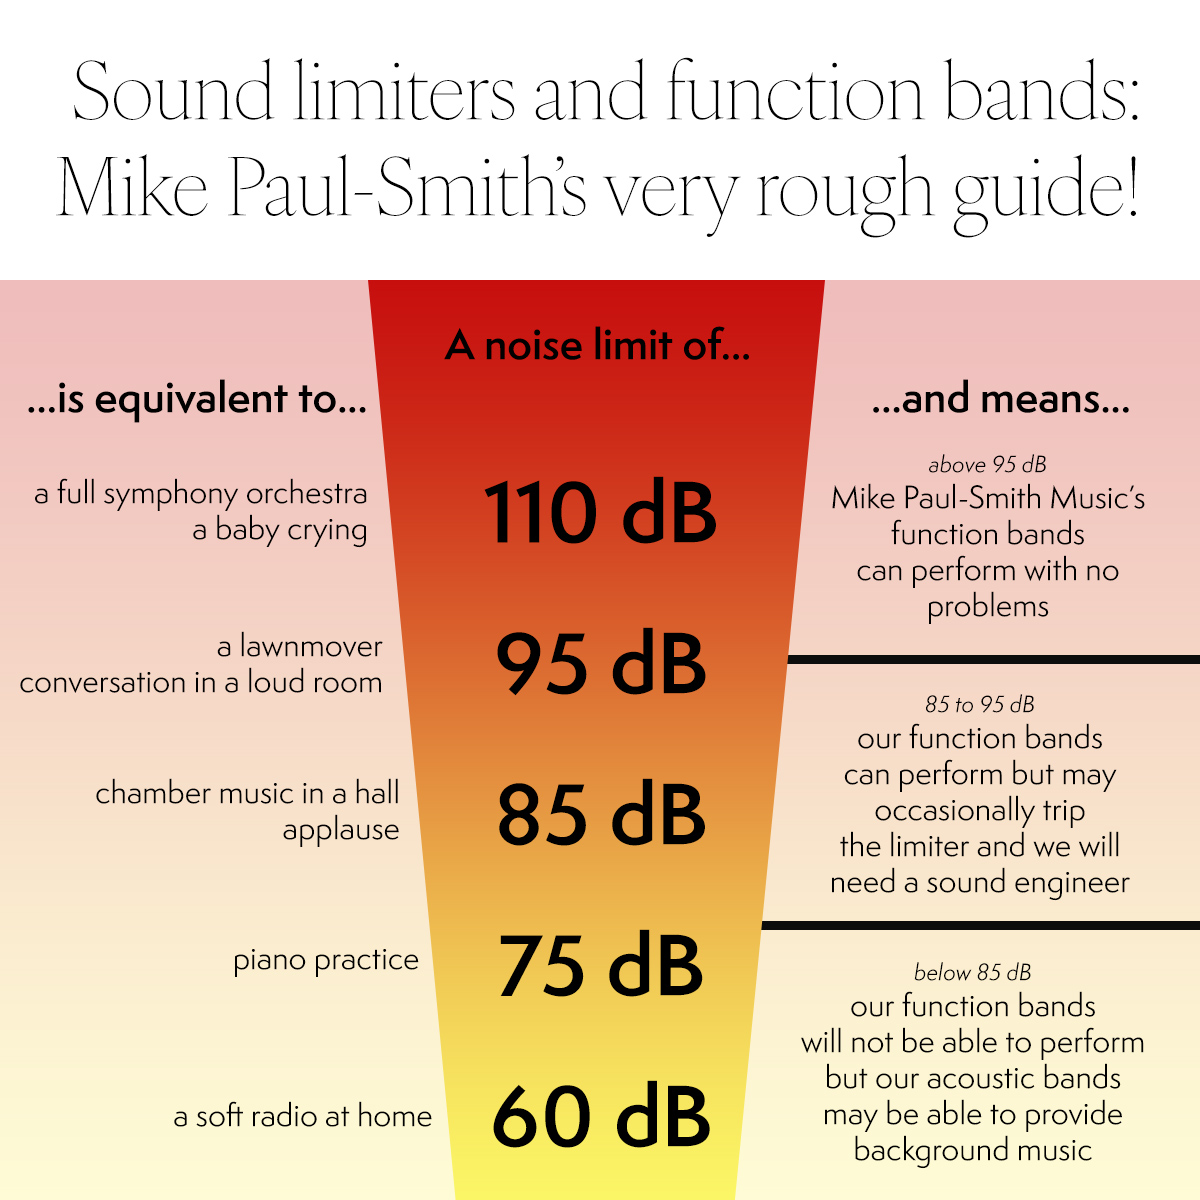 Mike Paul-Smith Music's guide to noise and sound limiters at wedding venues